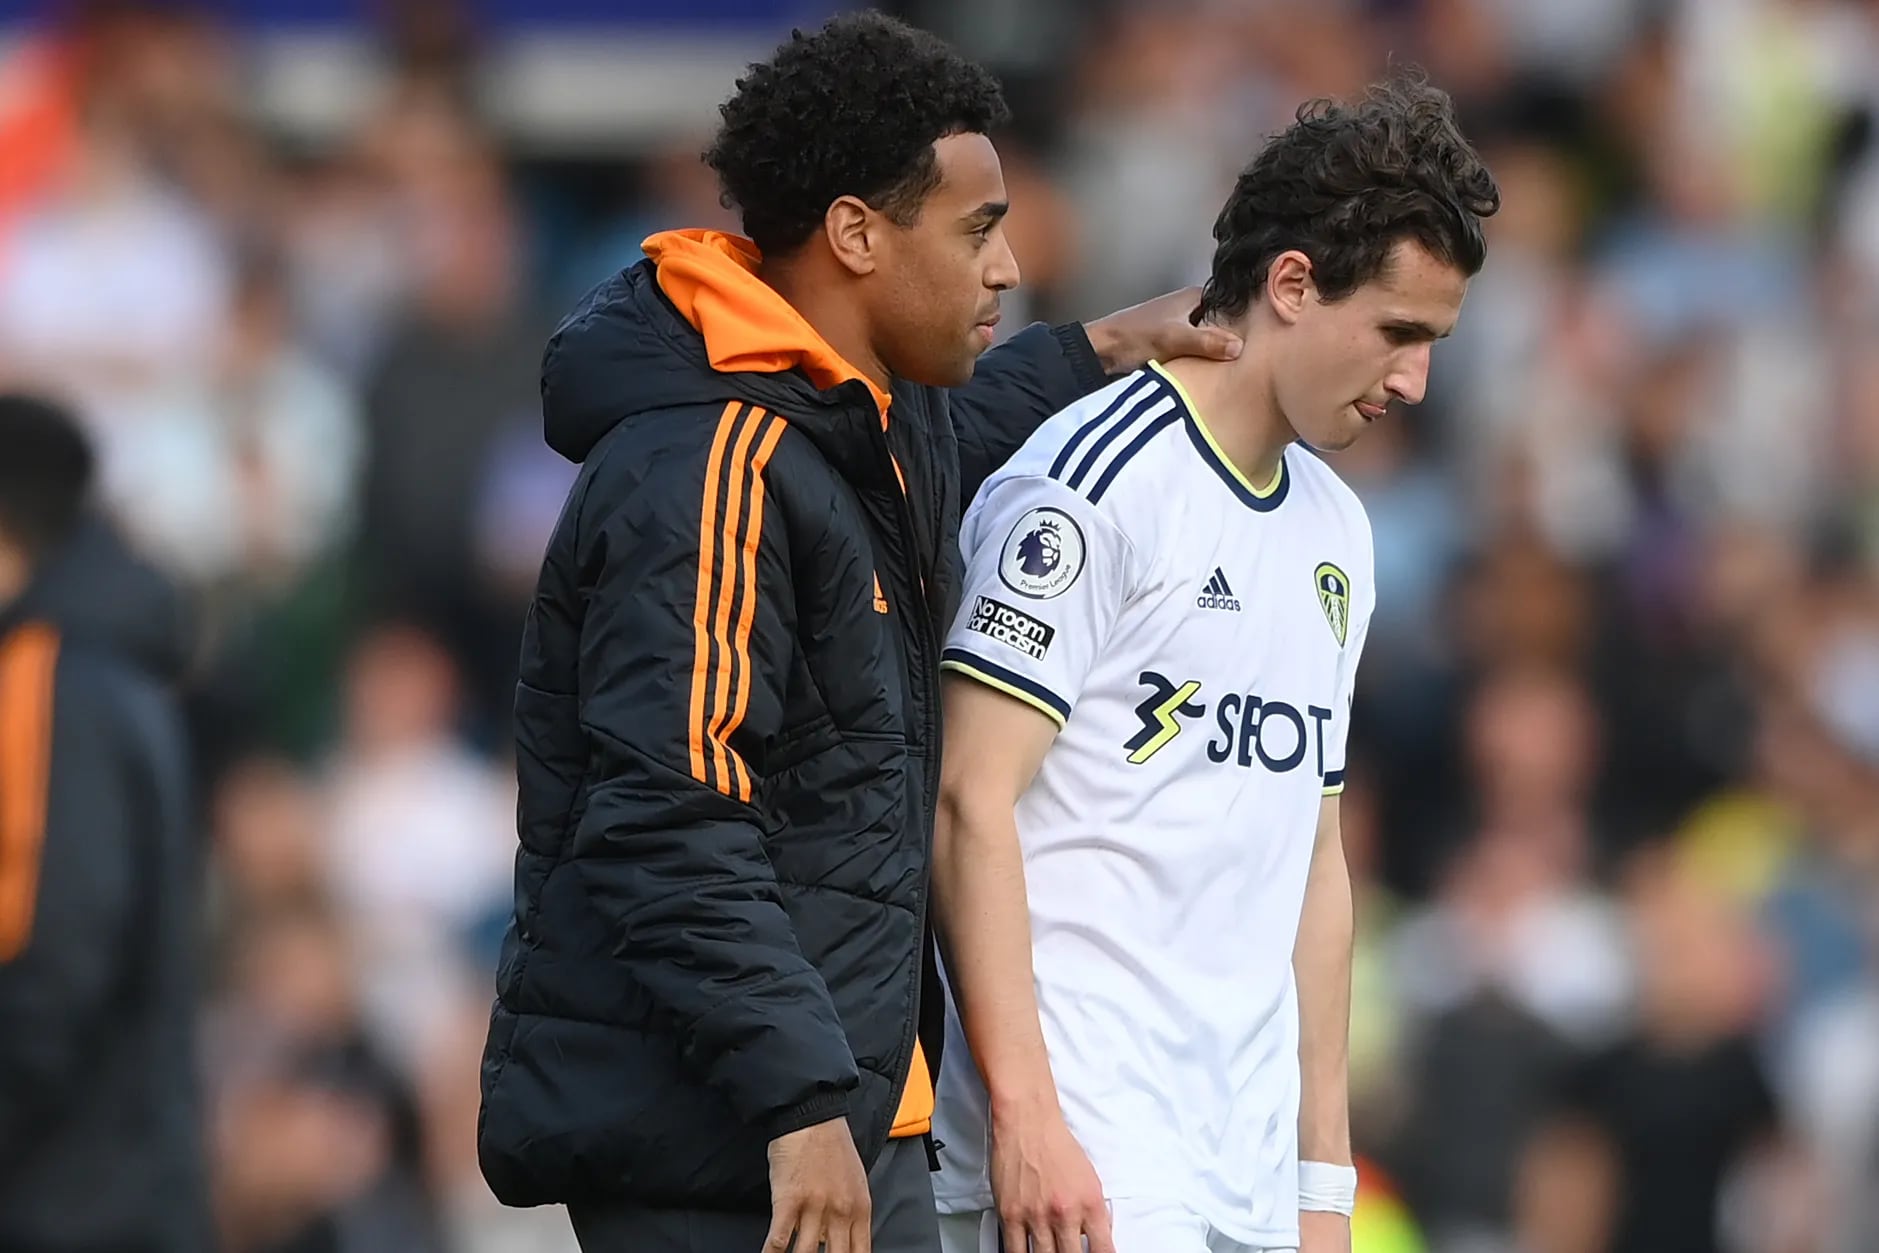 Brenden Aaronson (right) walks off the field with U.S. national team colleague Tyler Adams after their Leeds United squad was relegated from the English Premier League last season.